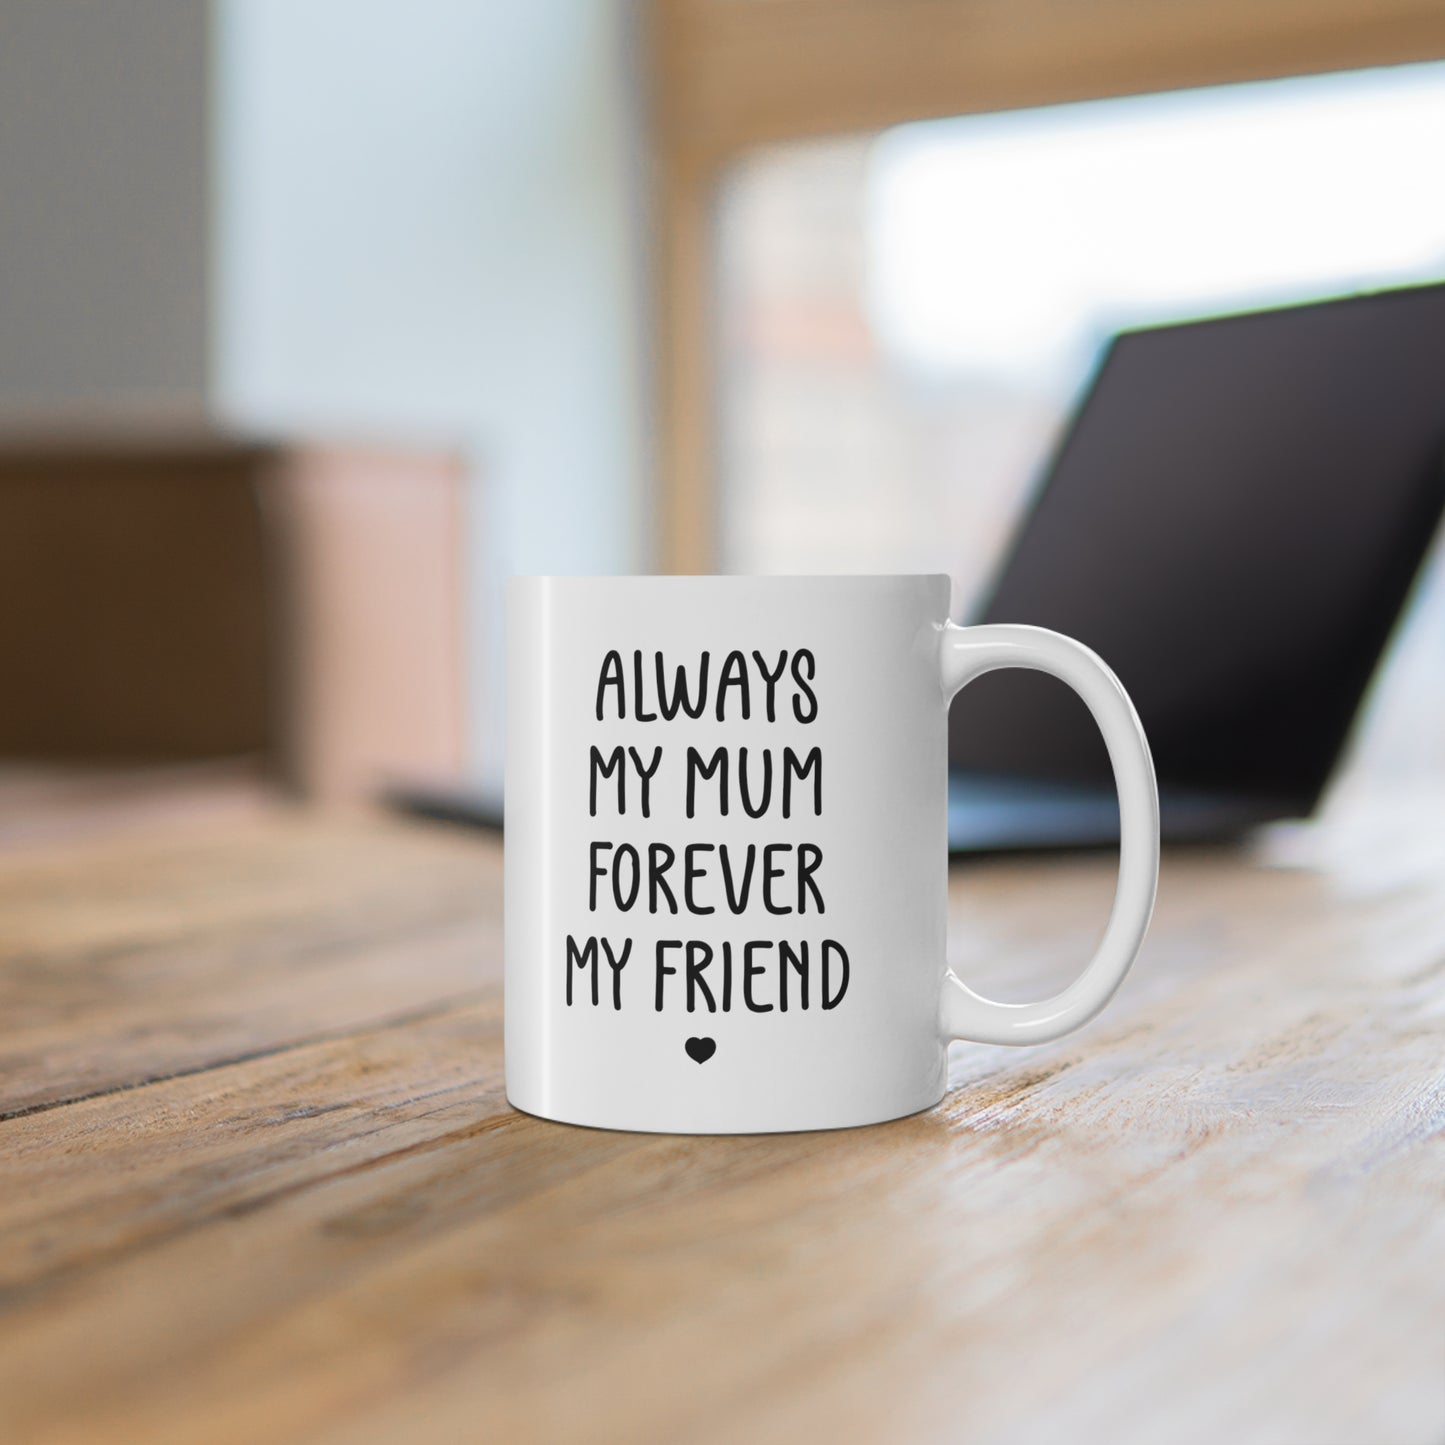 withe ceramic mug wtih quote Always My Mum Forever My Friend